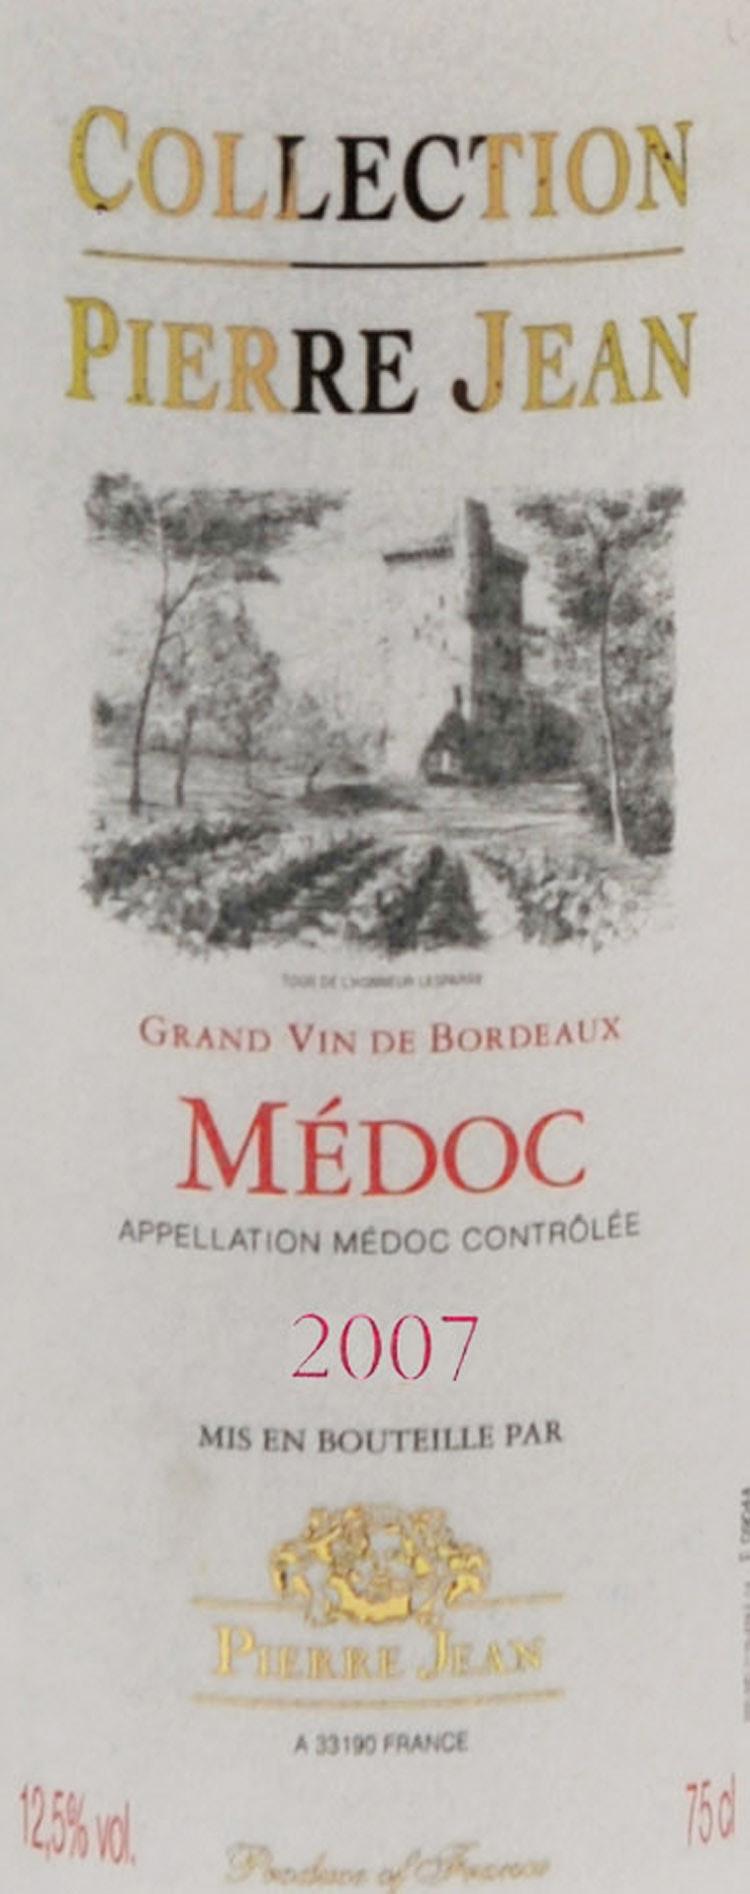 Collection Pierre Jean Medoc A.O.C. Medoc, Bordeaux 2007 Collection Pierre Jean Medoc - Appearance: a lovely dark red hue with purplish tints.